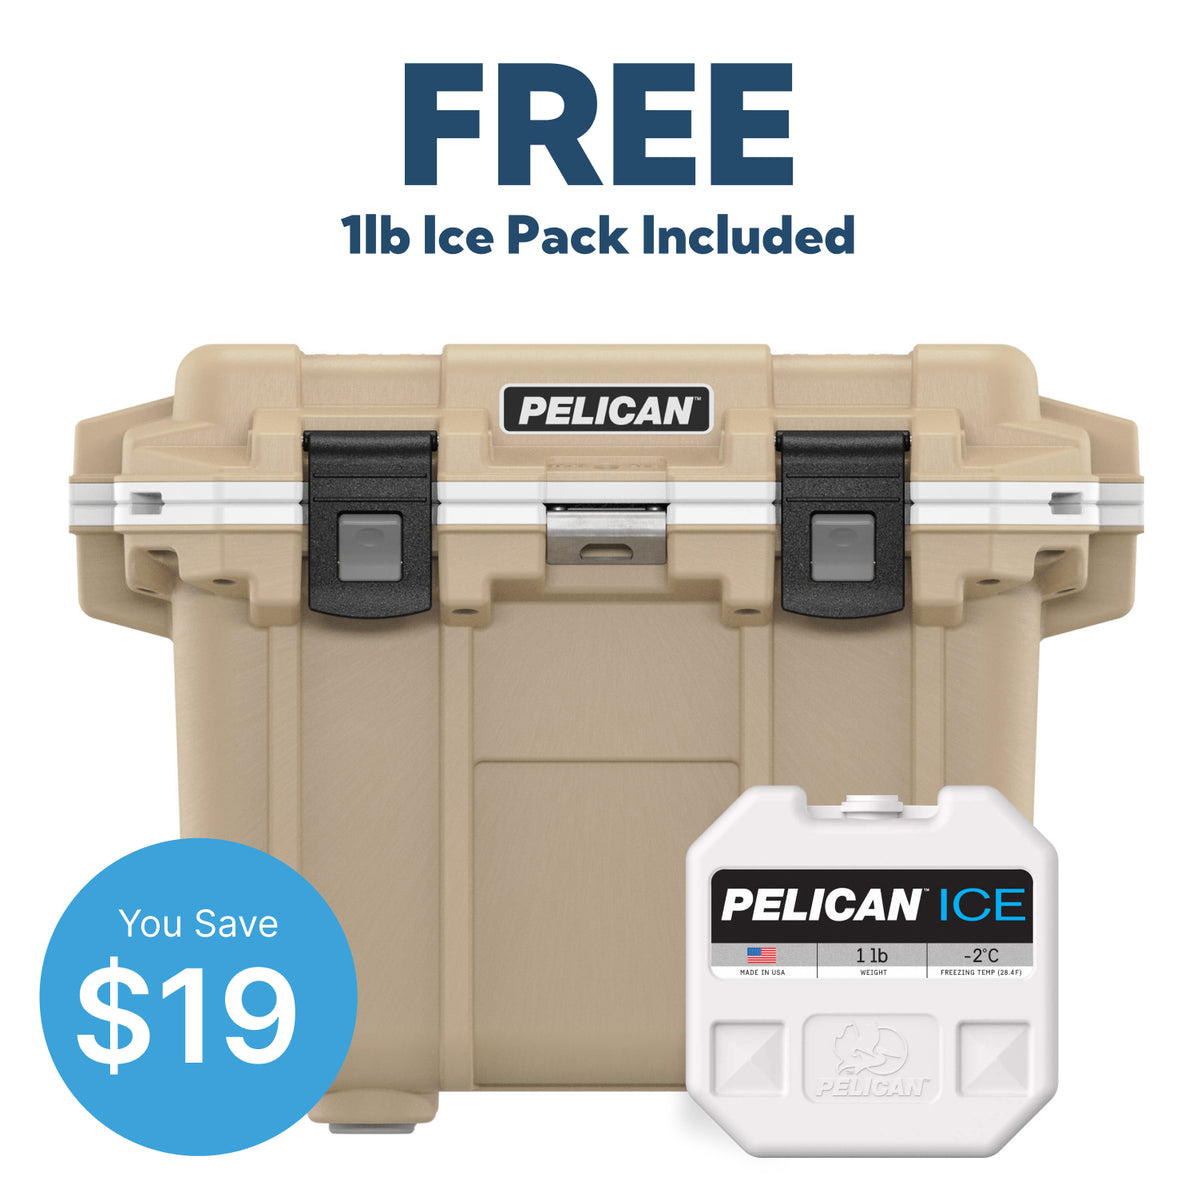 Tan / White Pelican 30QT Cooler with Pelican Ice Pack